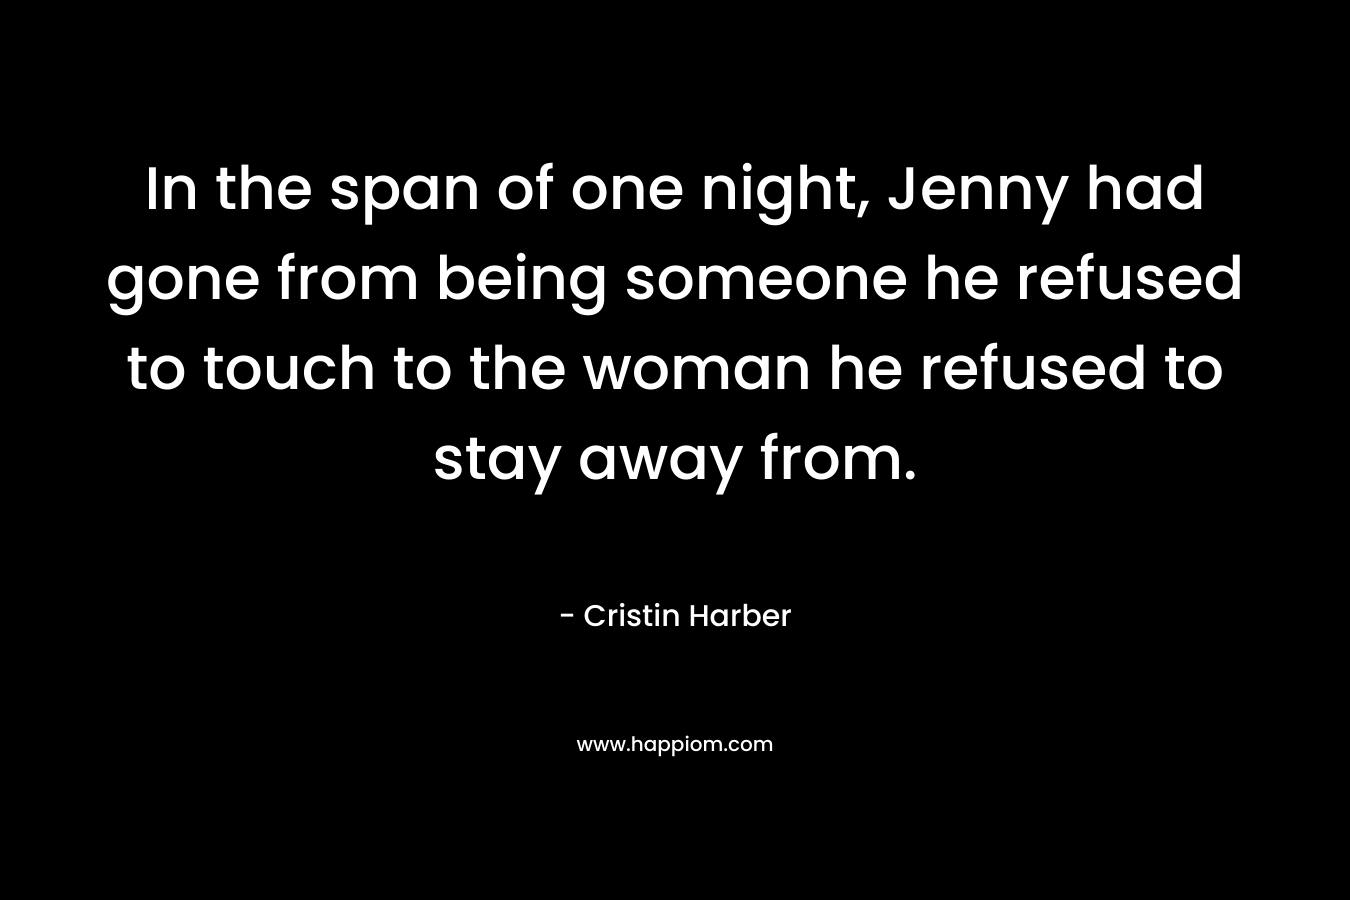 In the span of one night, Jenny had gone from being someone he refused to touch to the woman he refused to stay away from.